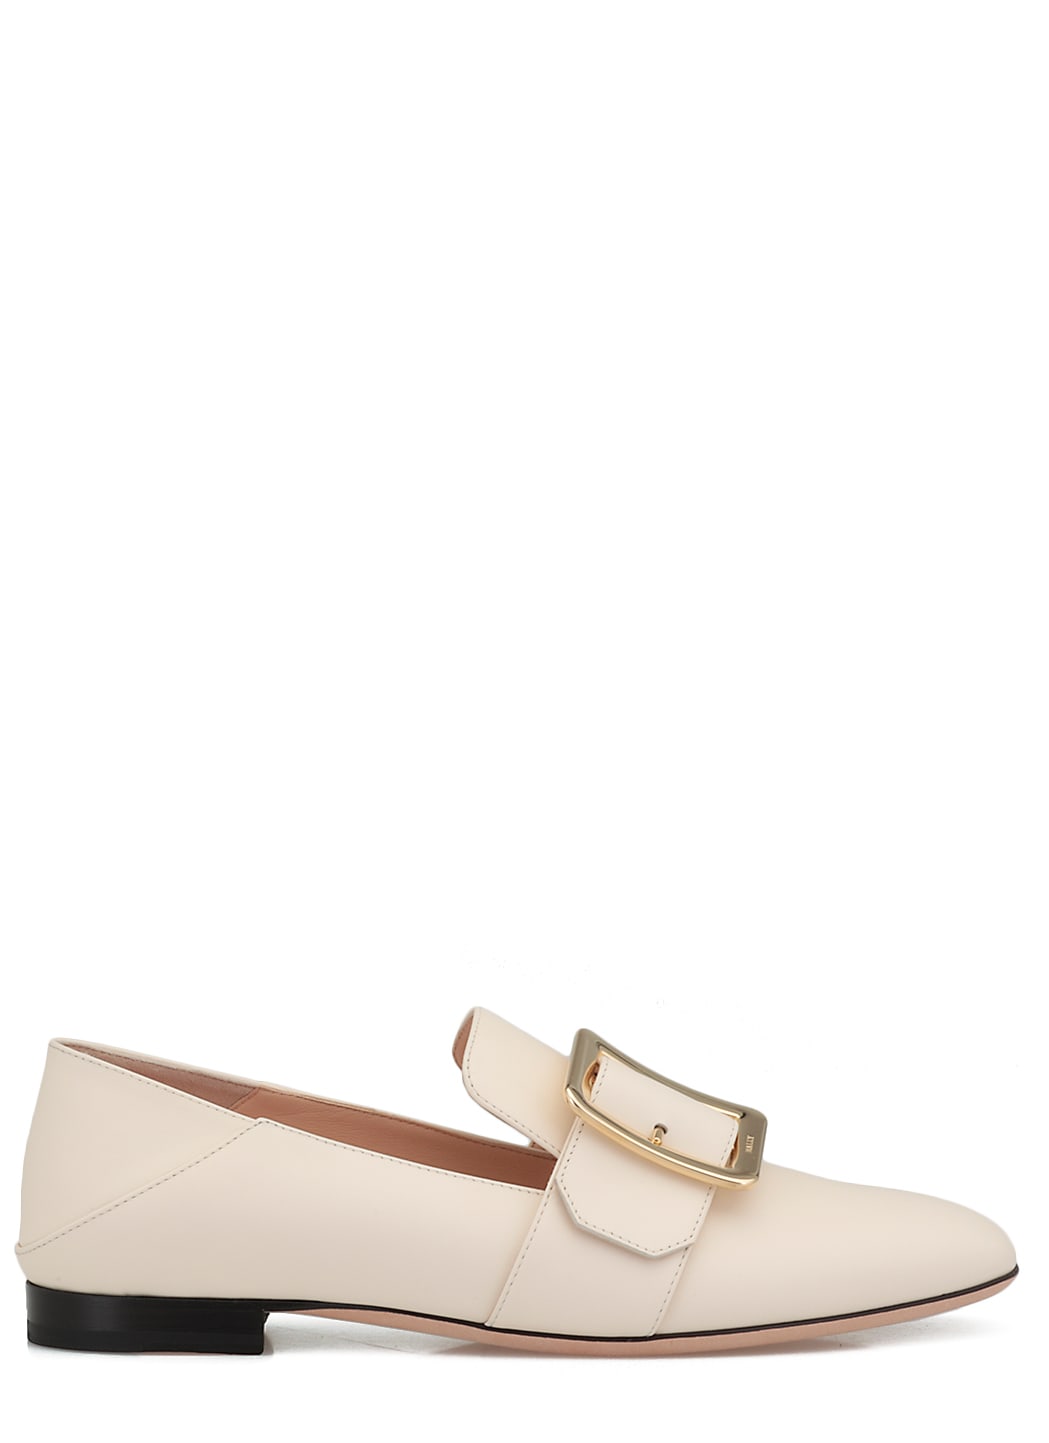 Bally Janelle Flat Shoes